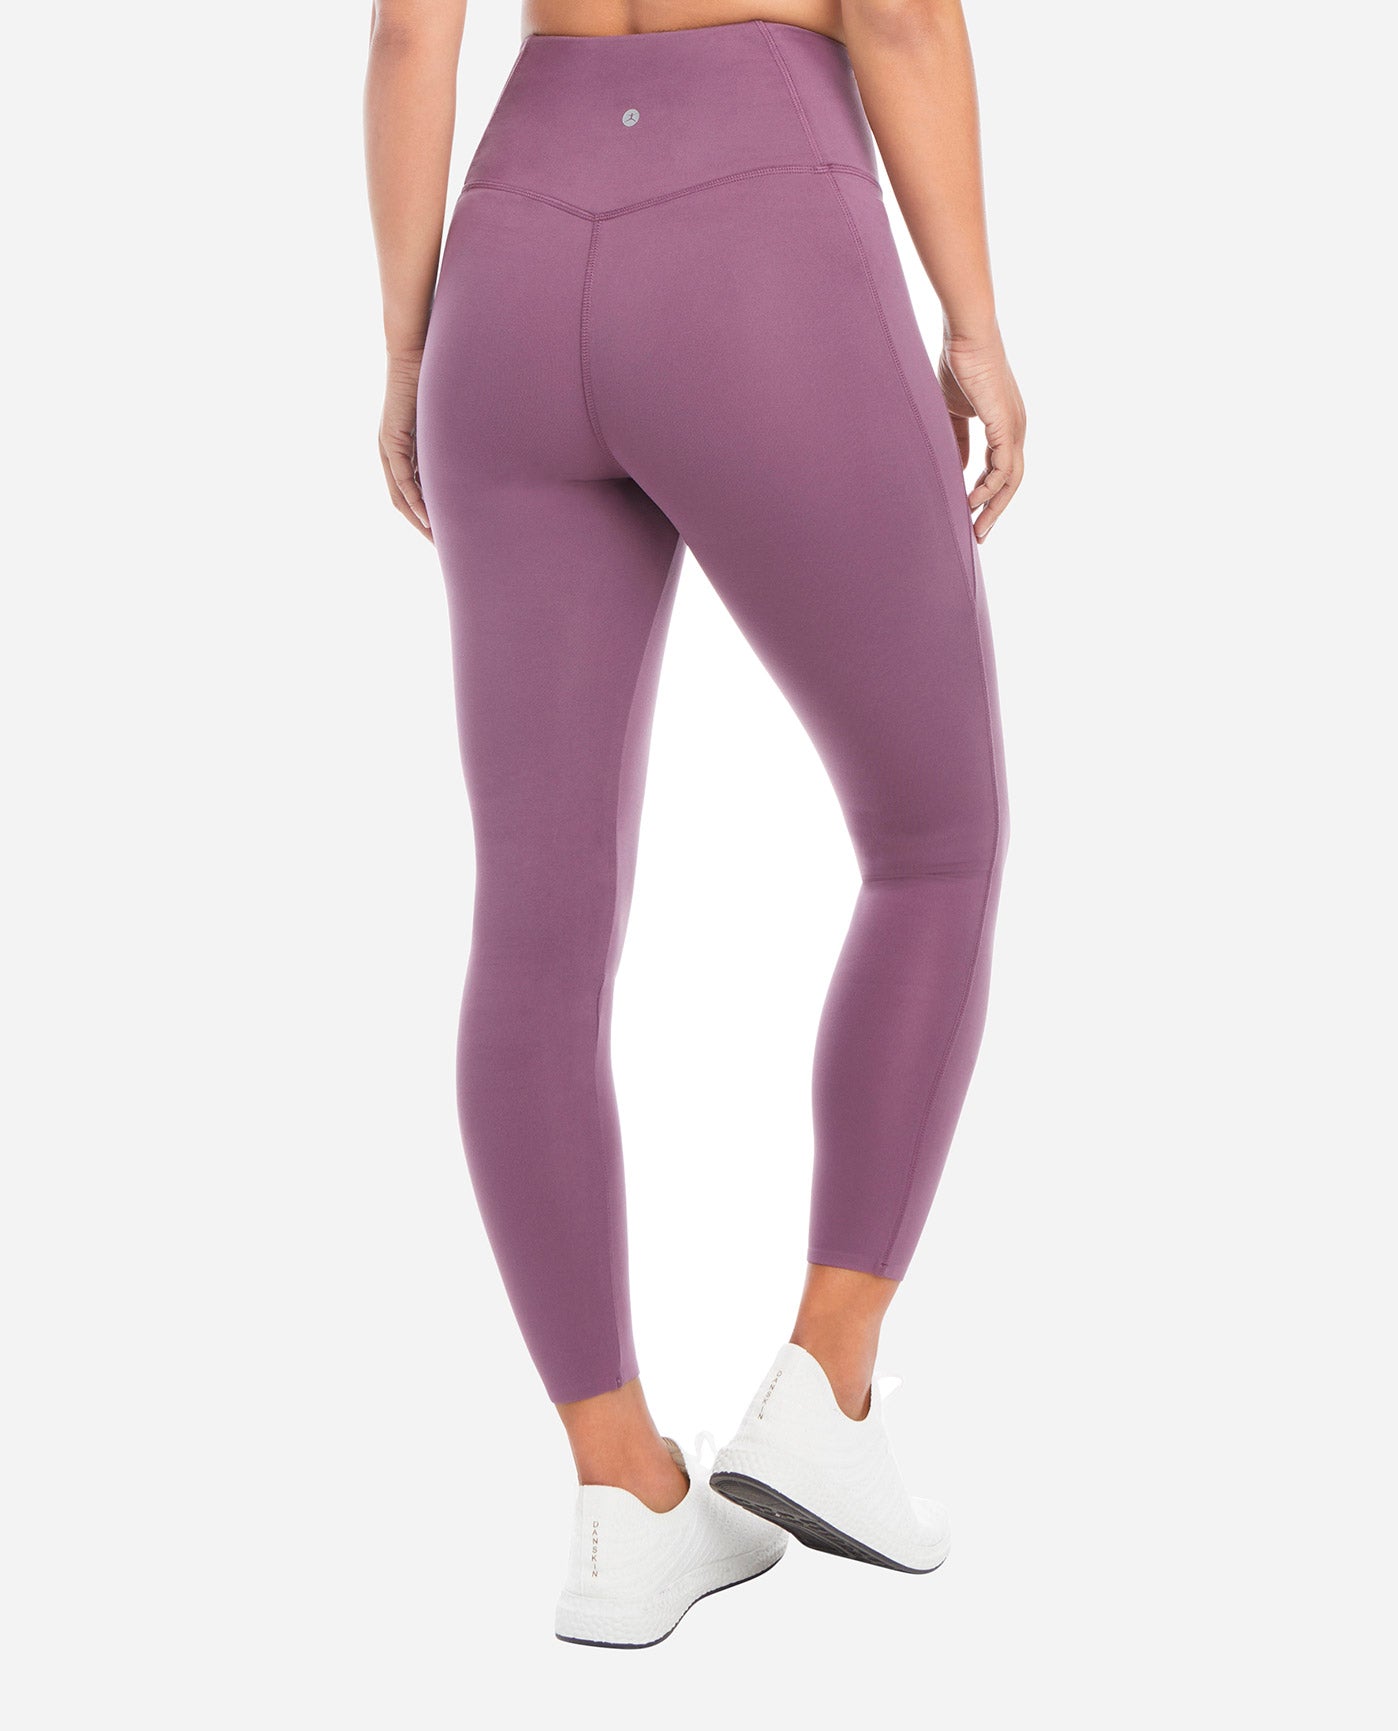 Ankle Length (Double Pocket) Tights - MAUVE PINK